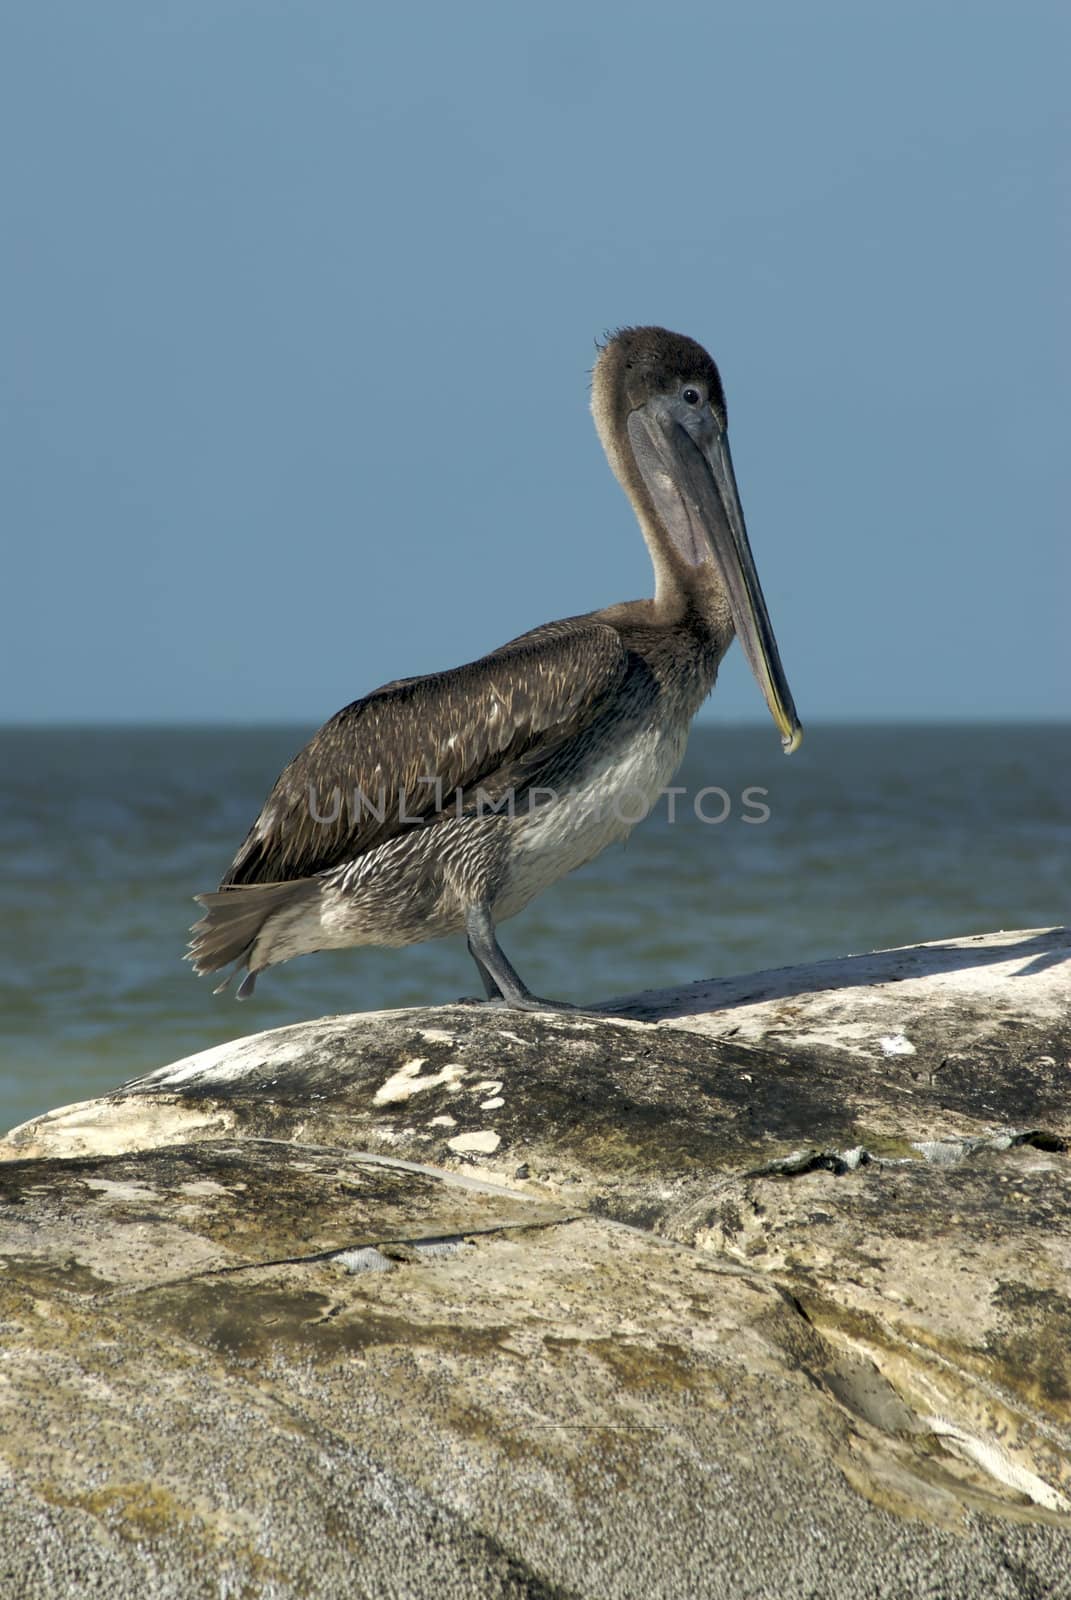 a majestic pelican stands alone on a rocky outcrop